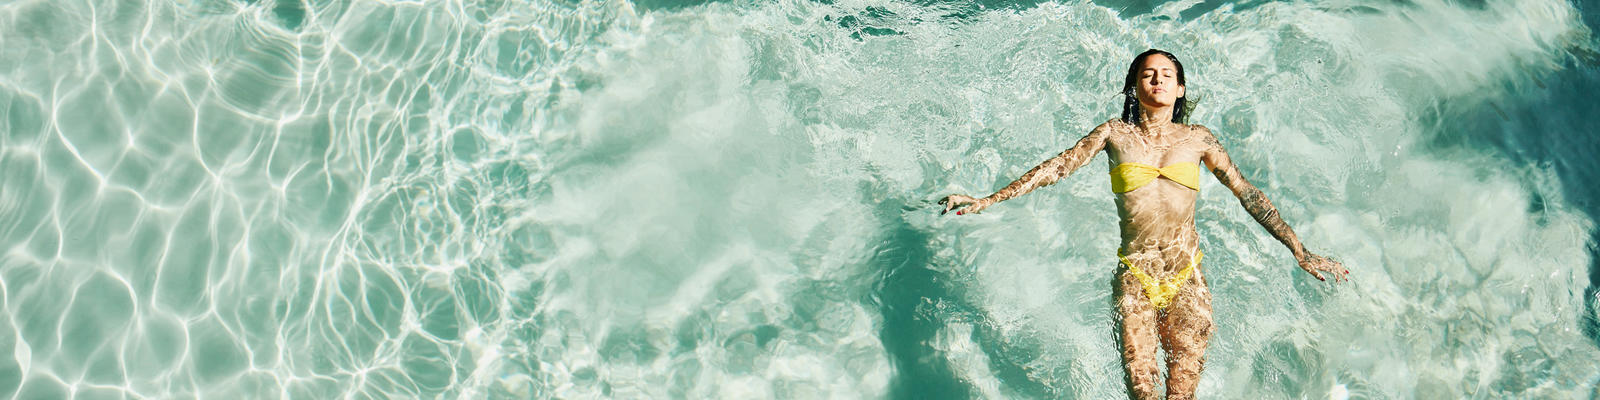 how to avoid getting sick while travelling - woman floats in a pool on holiday